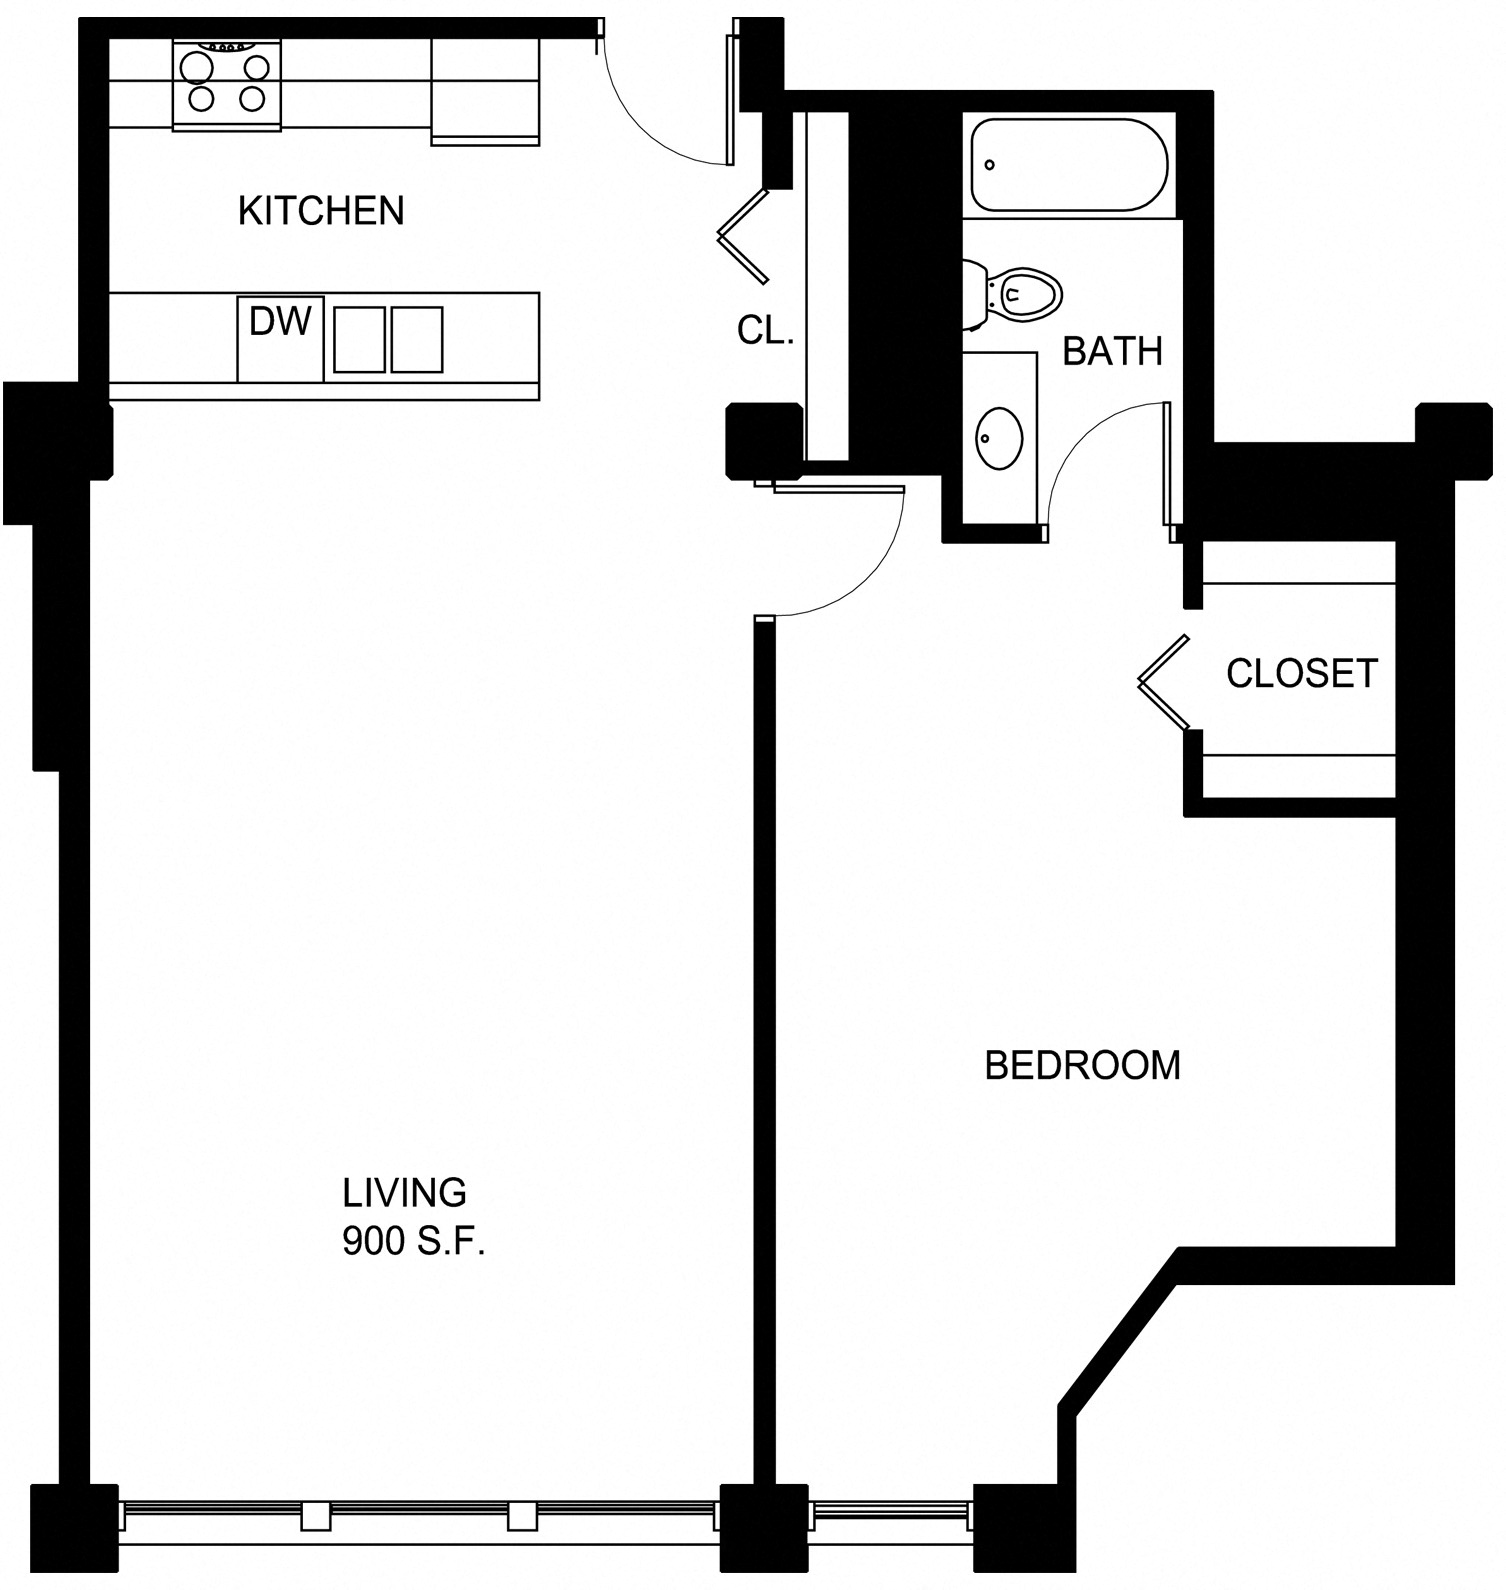 Floorplan for Apartment #P214, 1 bedroom unit at Halstead Providence